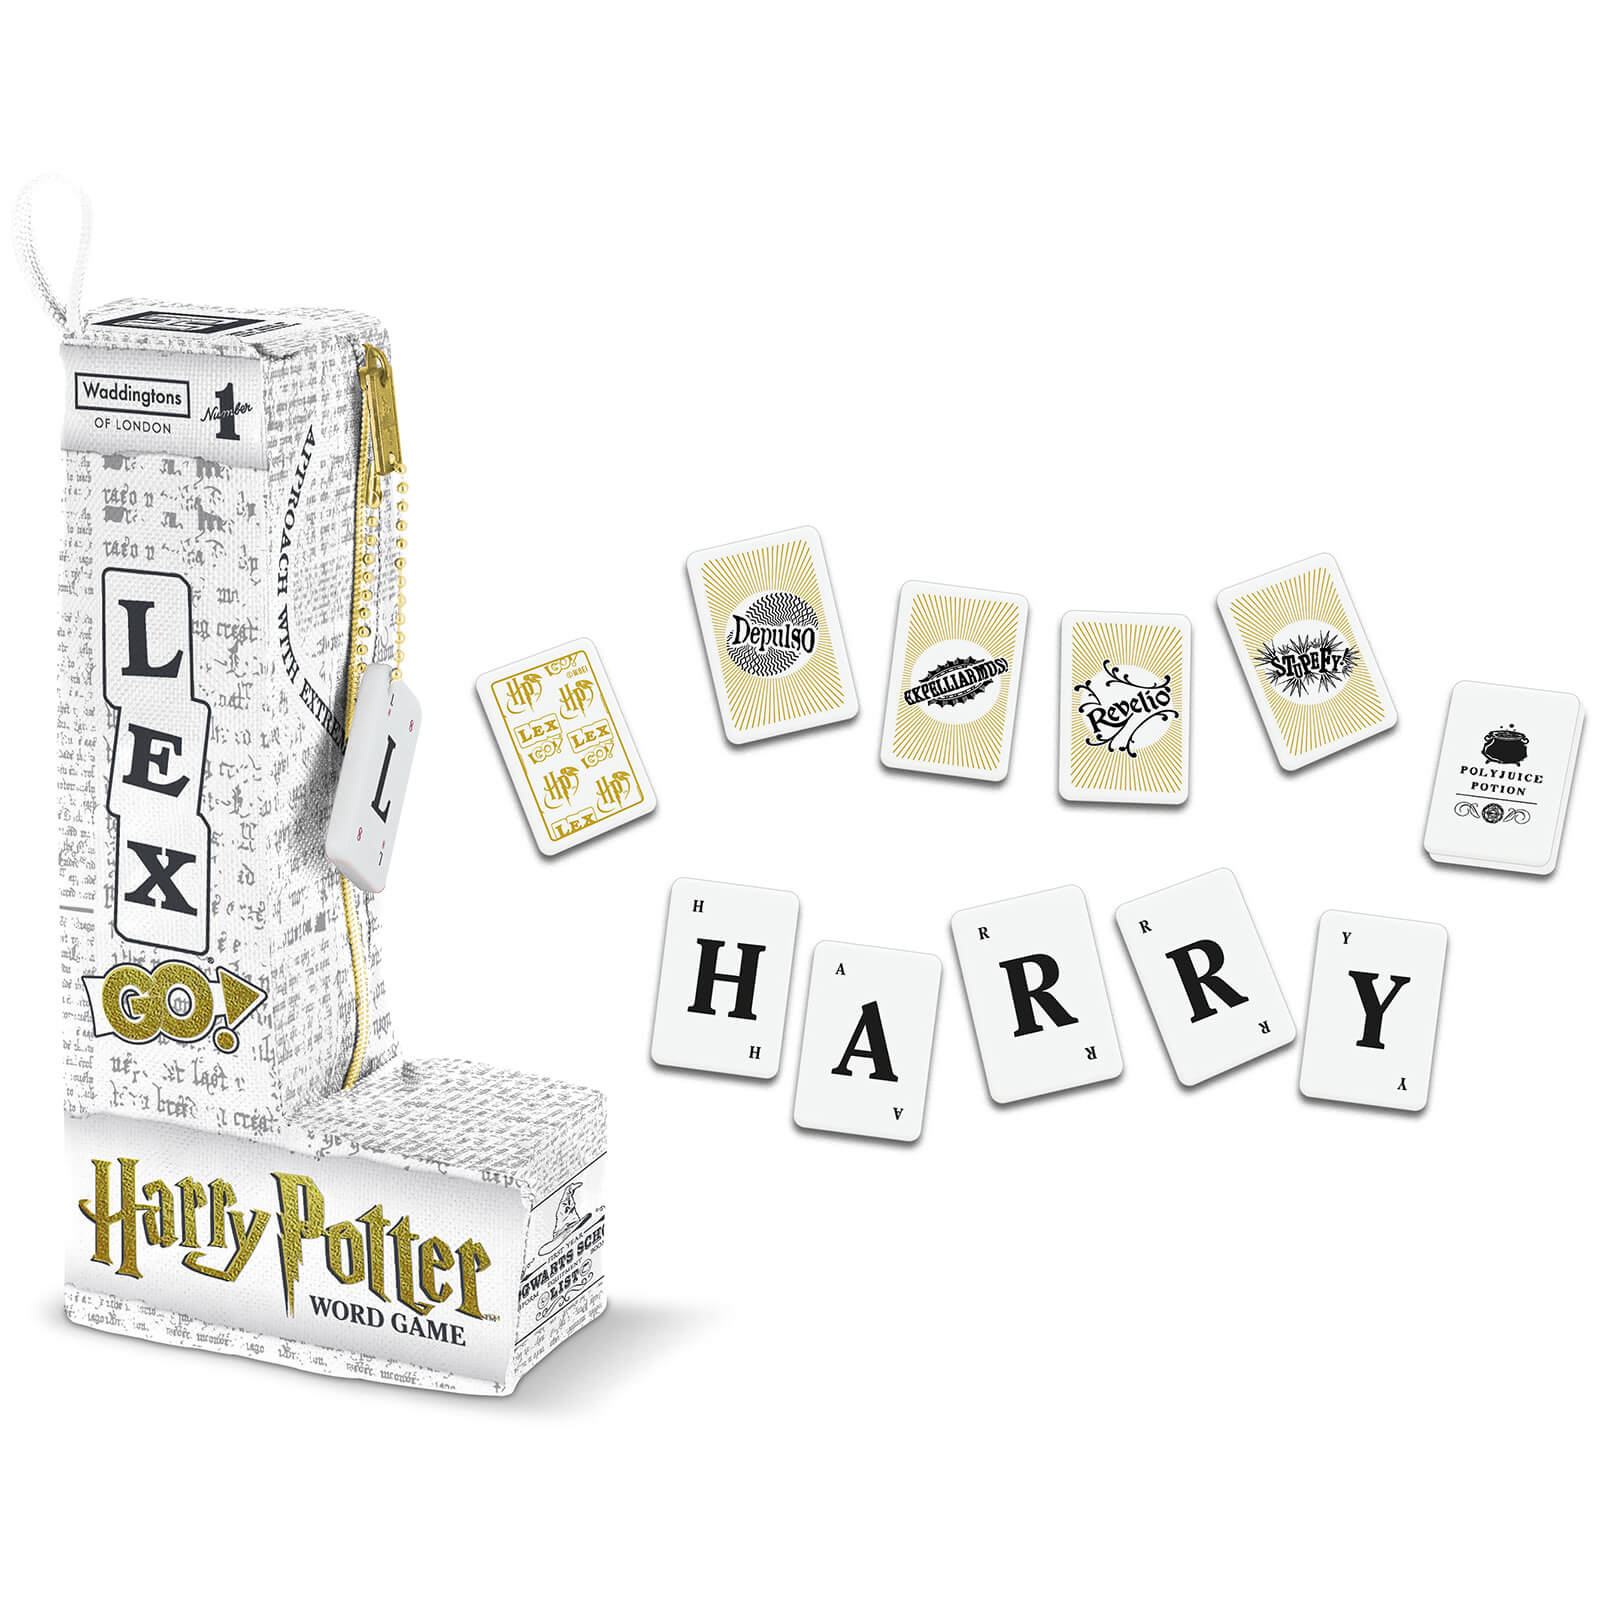 Winning Moves Lexgo! word game - harry potter edition